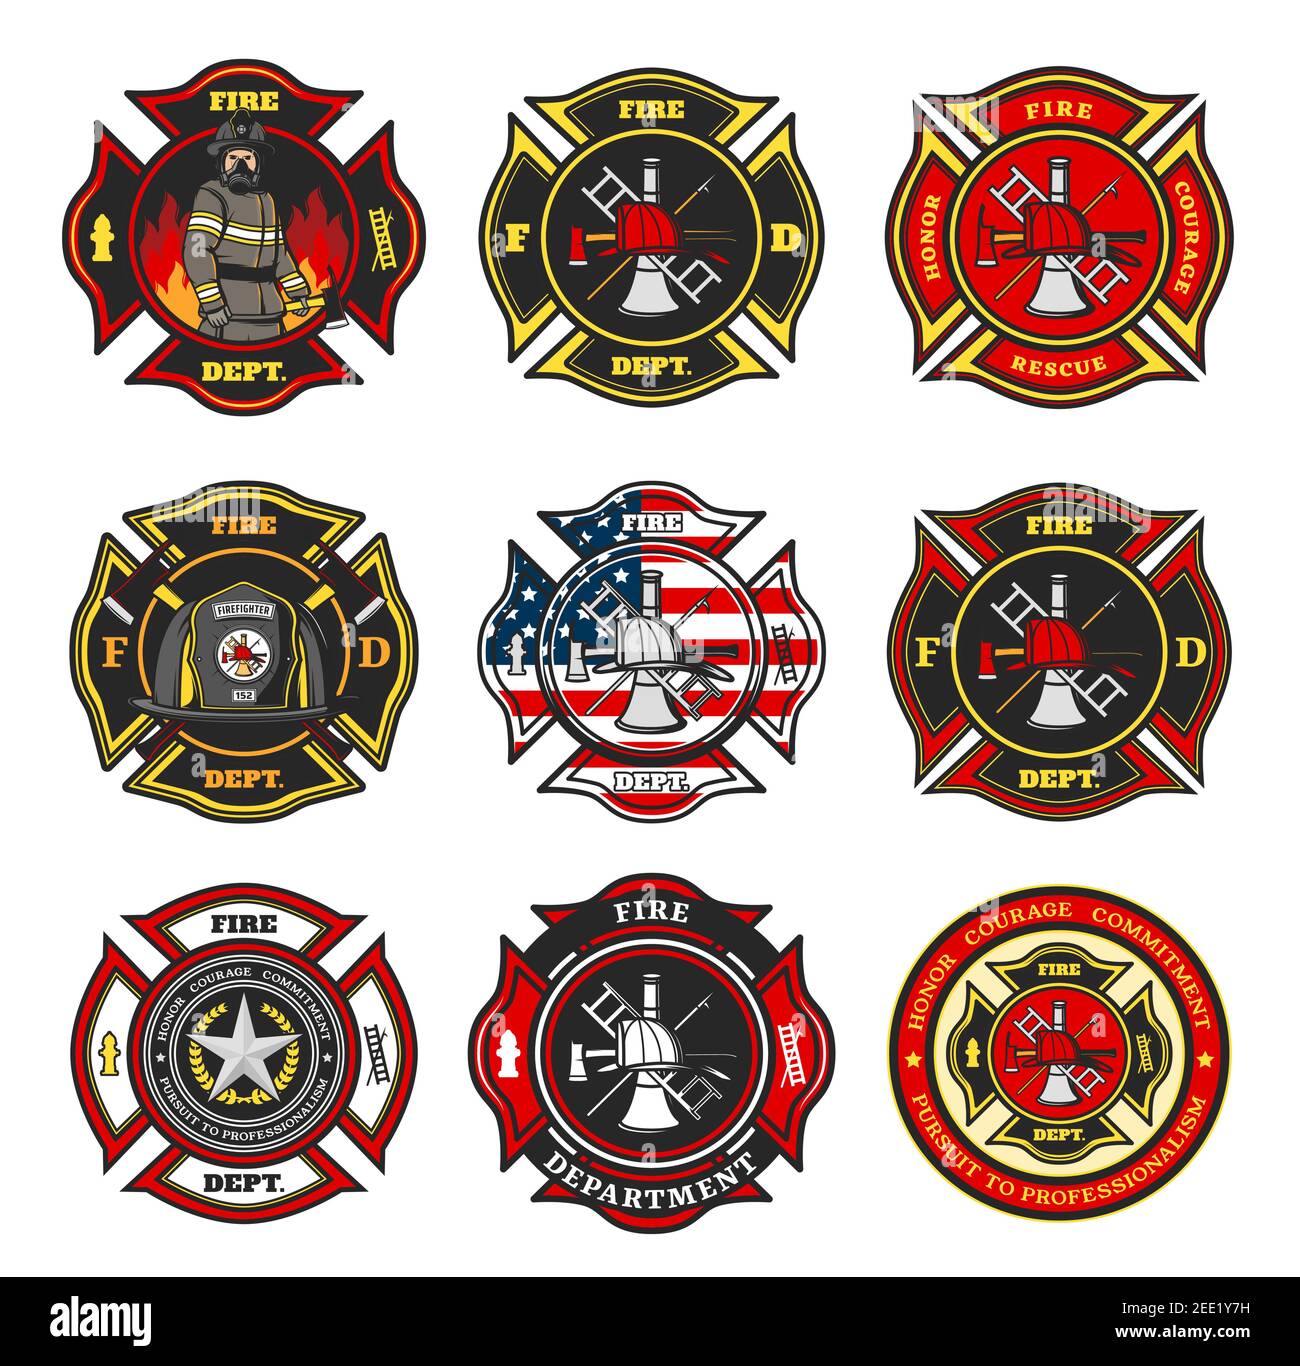 Fire department badges, firefighter team cross shaped emblems with fireman in uniform, helmet and gas mask standing in flame, firefighter tools and eq Stock Vector